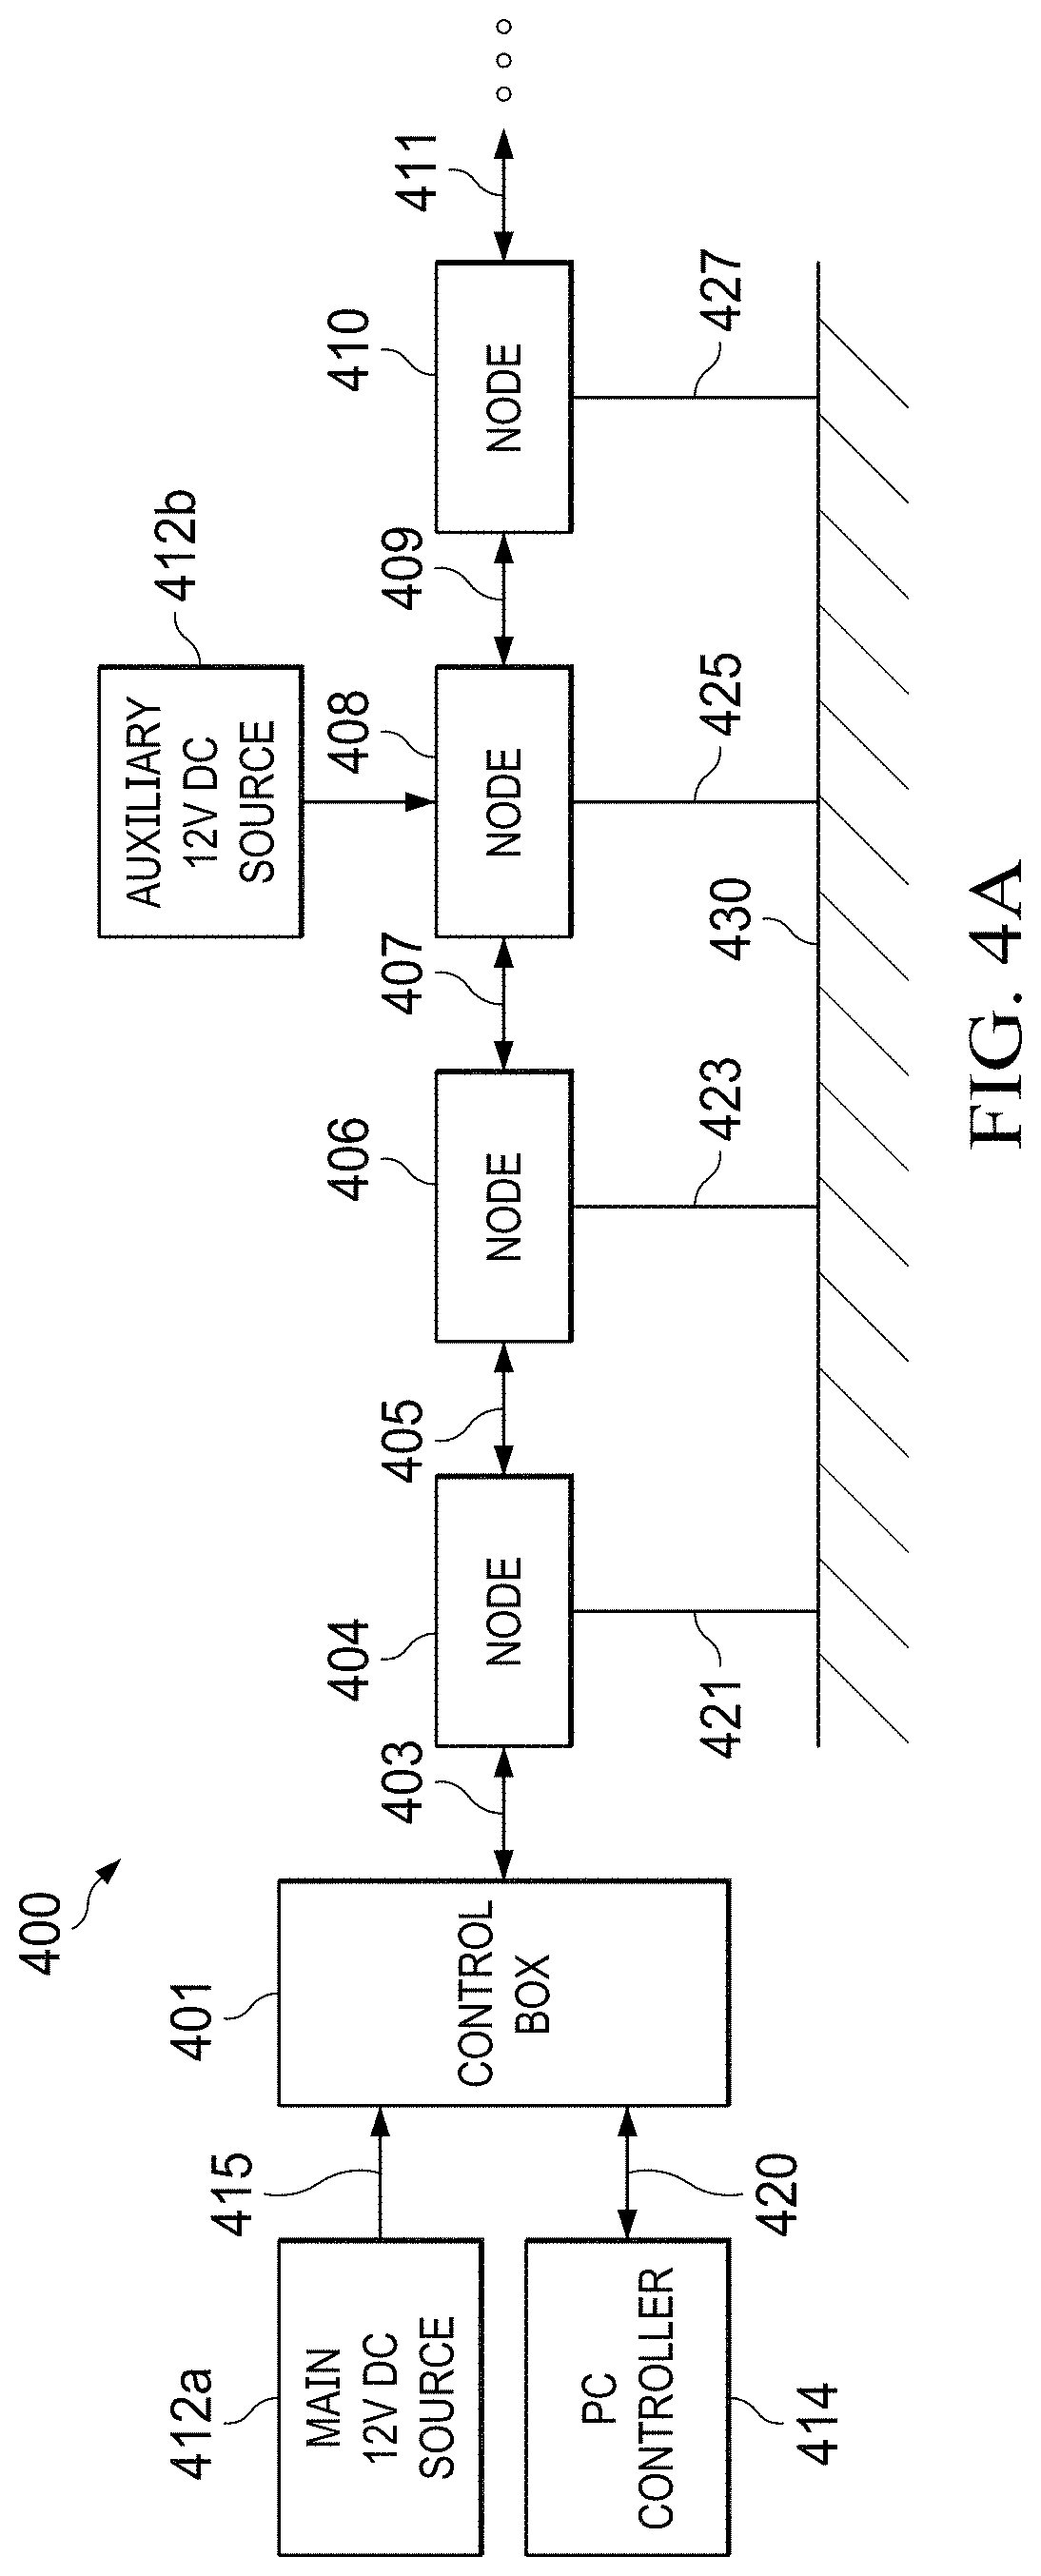 Architecture for a multichannel geophysical data acquisition system and method of use